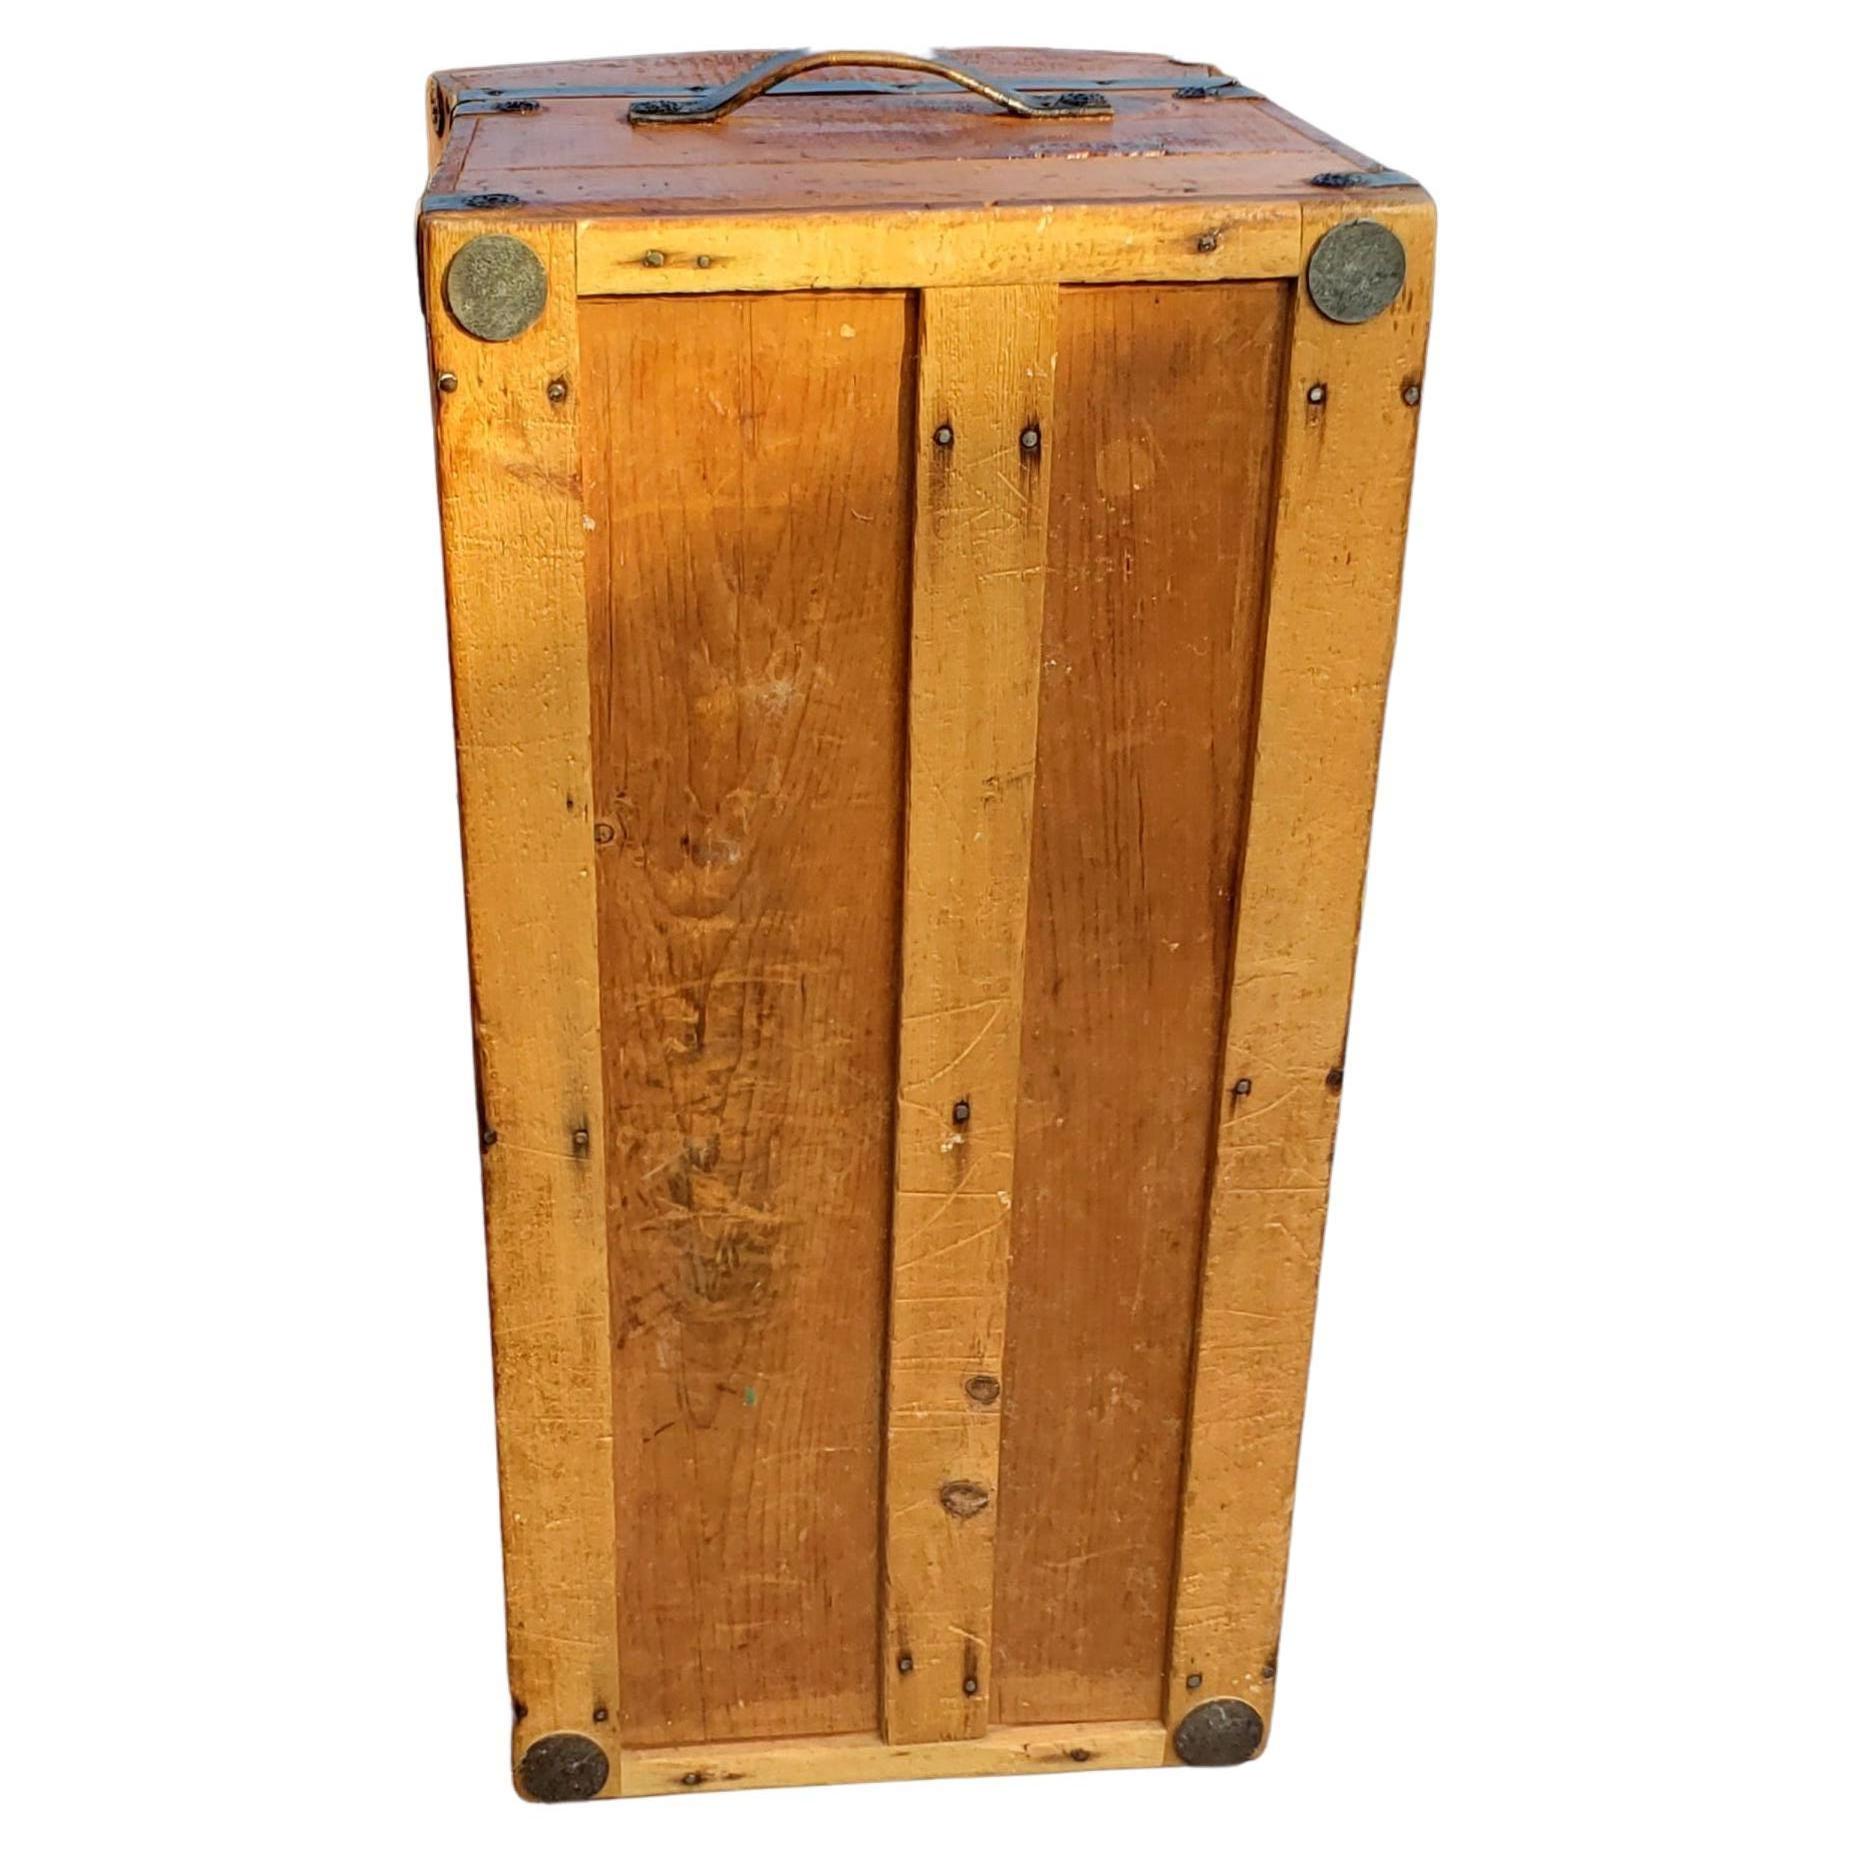 Vintage American Pine Trunk with Solid Wooden Handles, circa 1960s For Sale 3